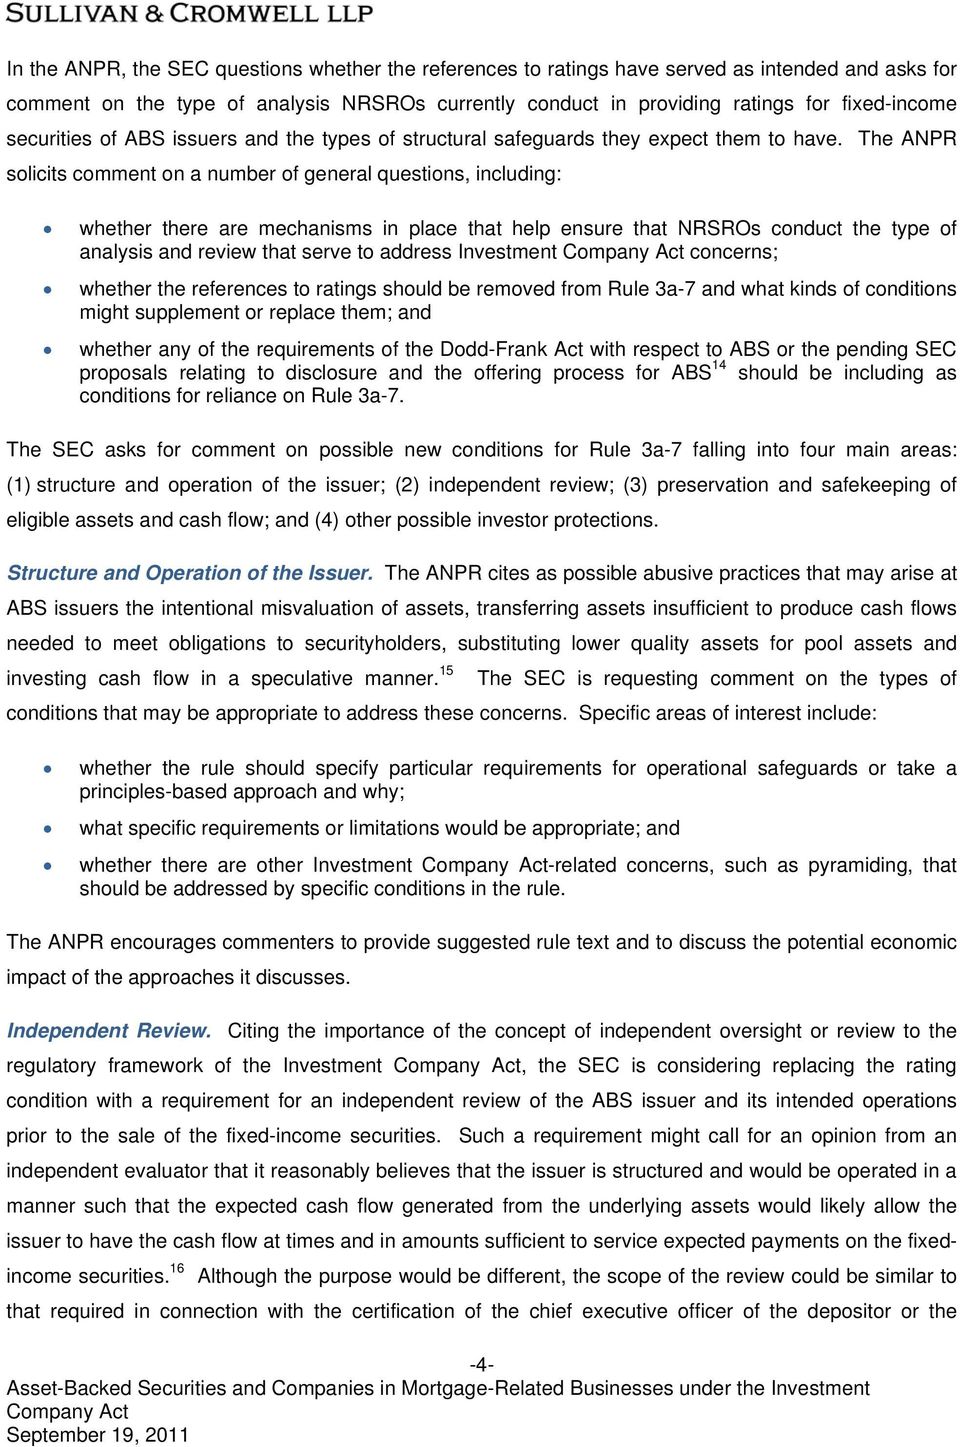 The ANPR solicits comment on a number of general questions, including: whether there are mechanisms in place that help ensure that NRSROs conduct the type of analysis and review that serve to address